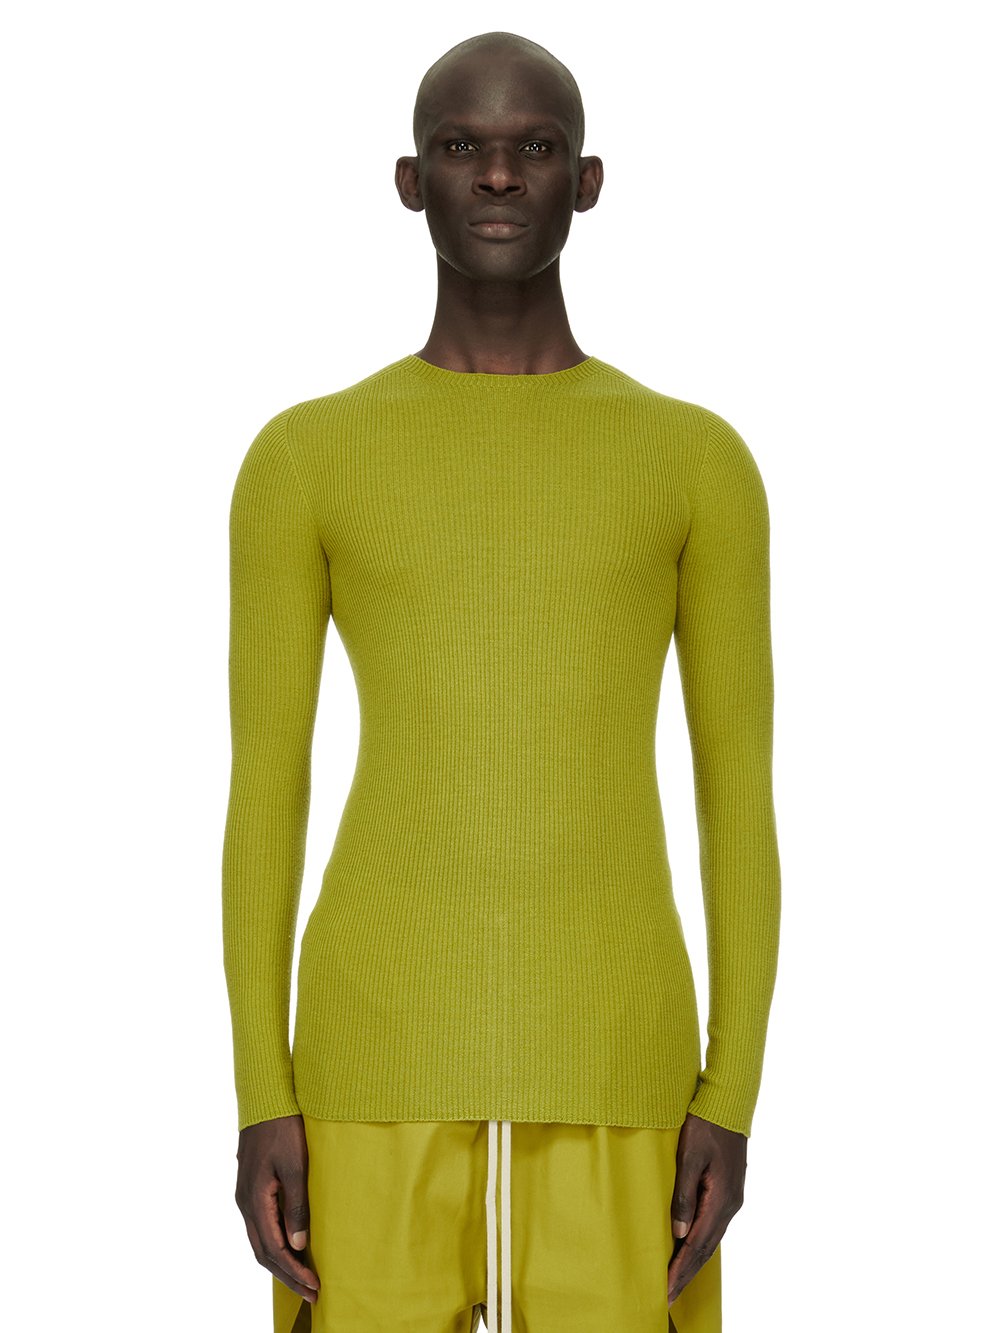 RICK OWENS FW23 LUXOR RIBBED ROUND NECK IN ACID YELLOW LIGHTWEIGHT RIBBED KNIT